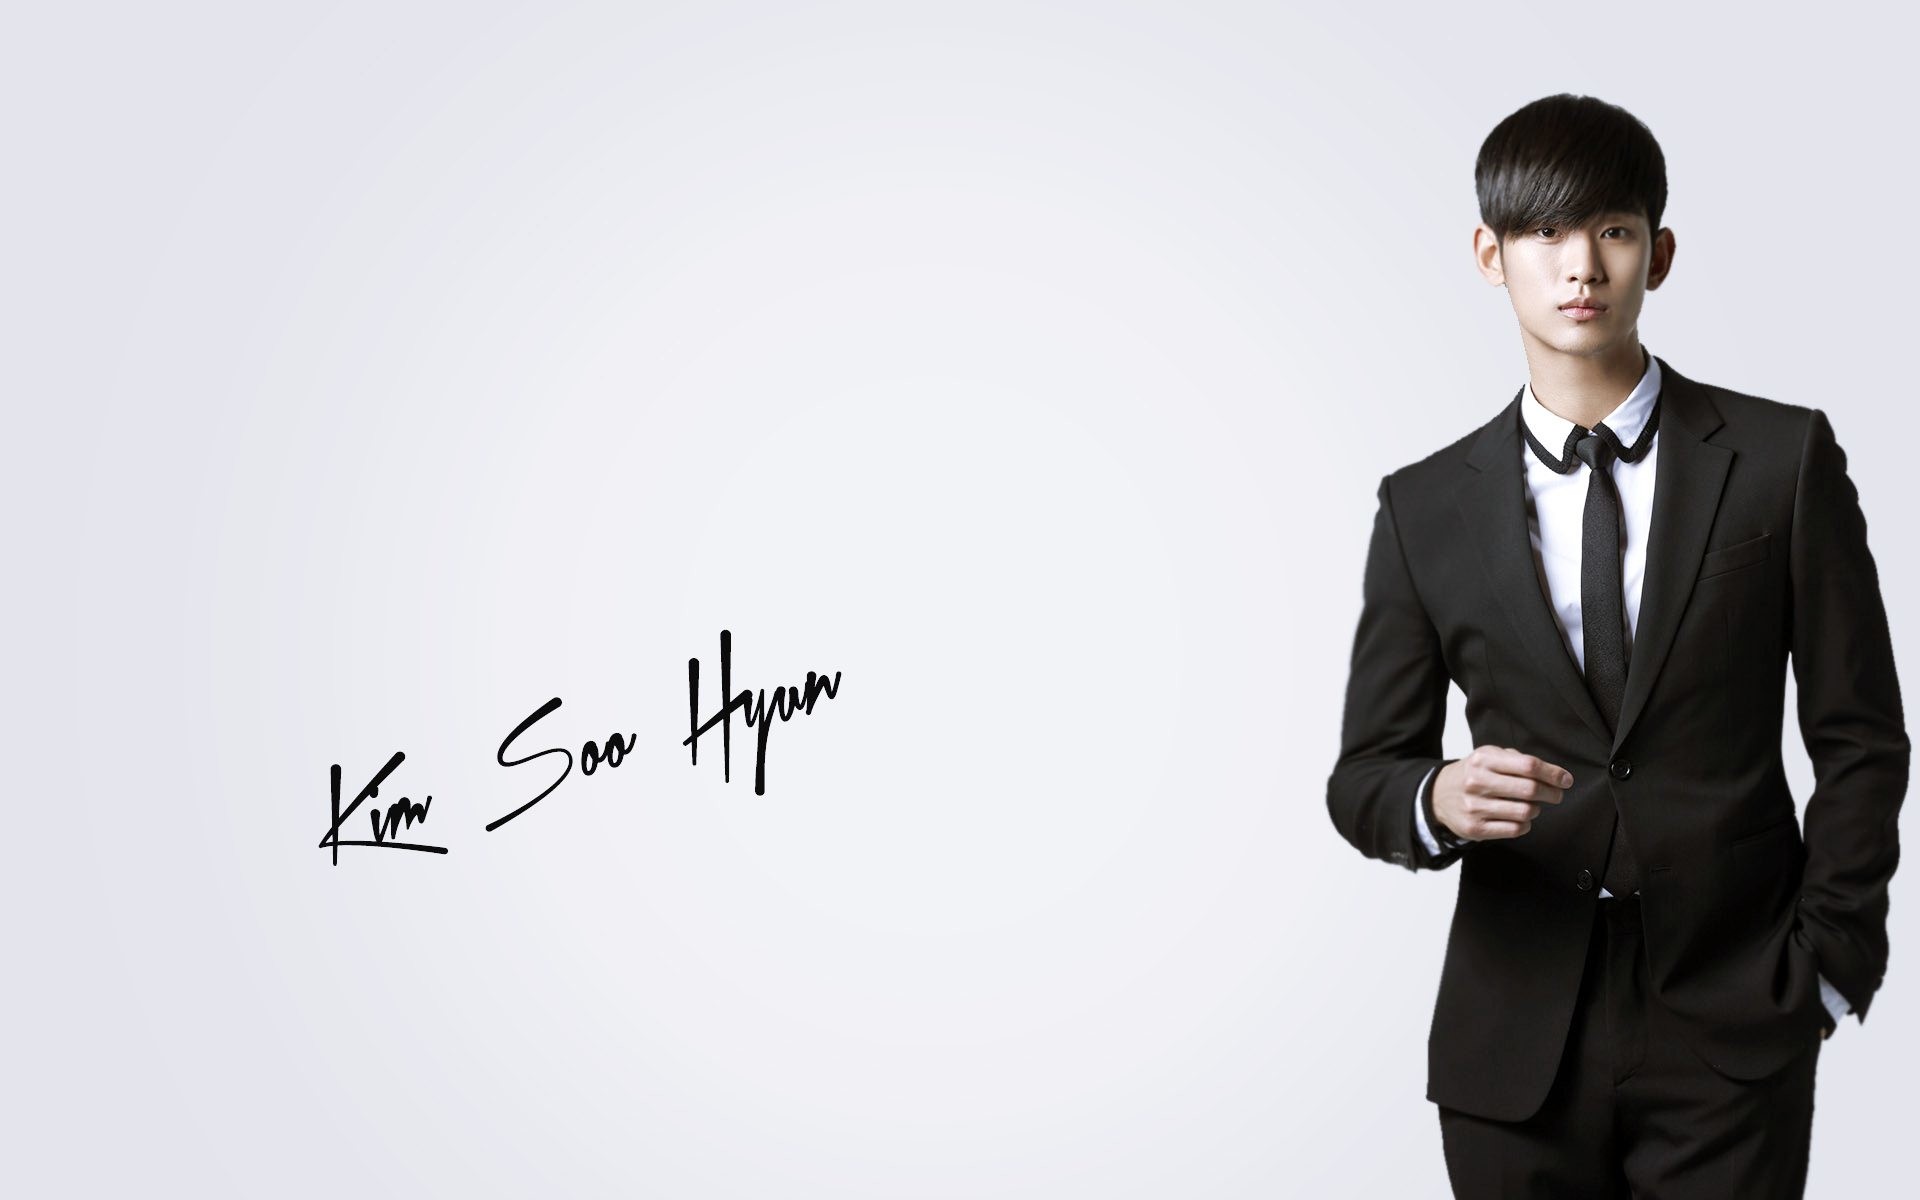 More Wallpaper Collections - Actor Kim Soo Hyun , HD Wallpaper & Backgrounds